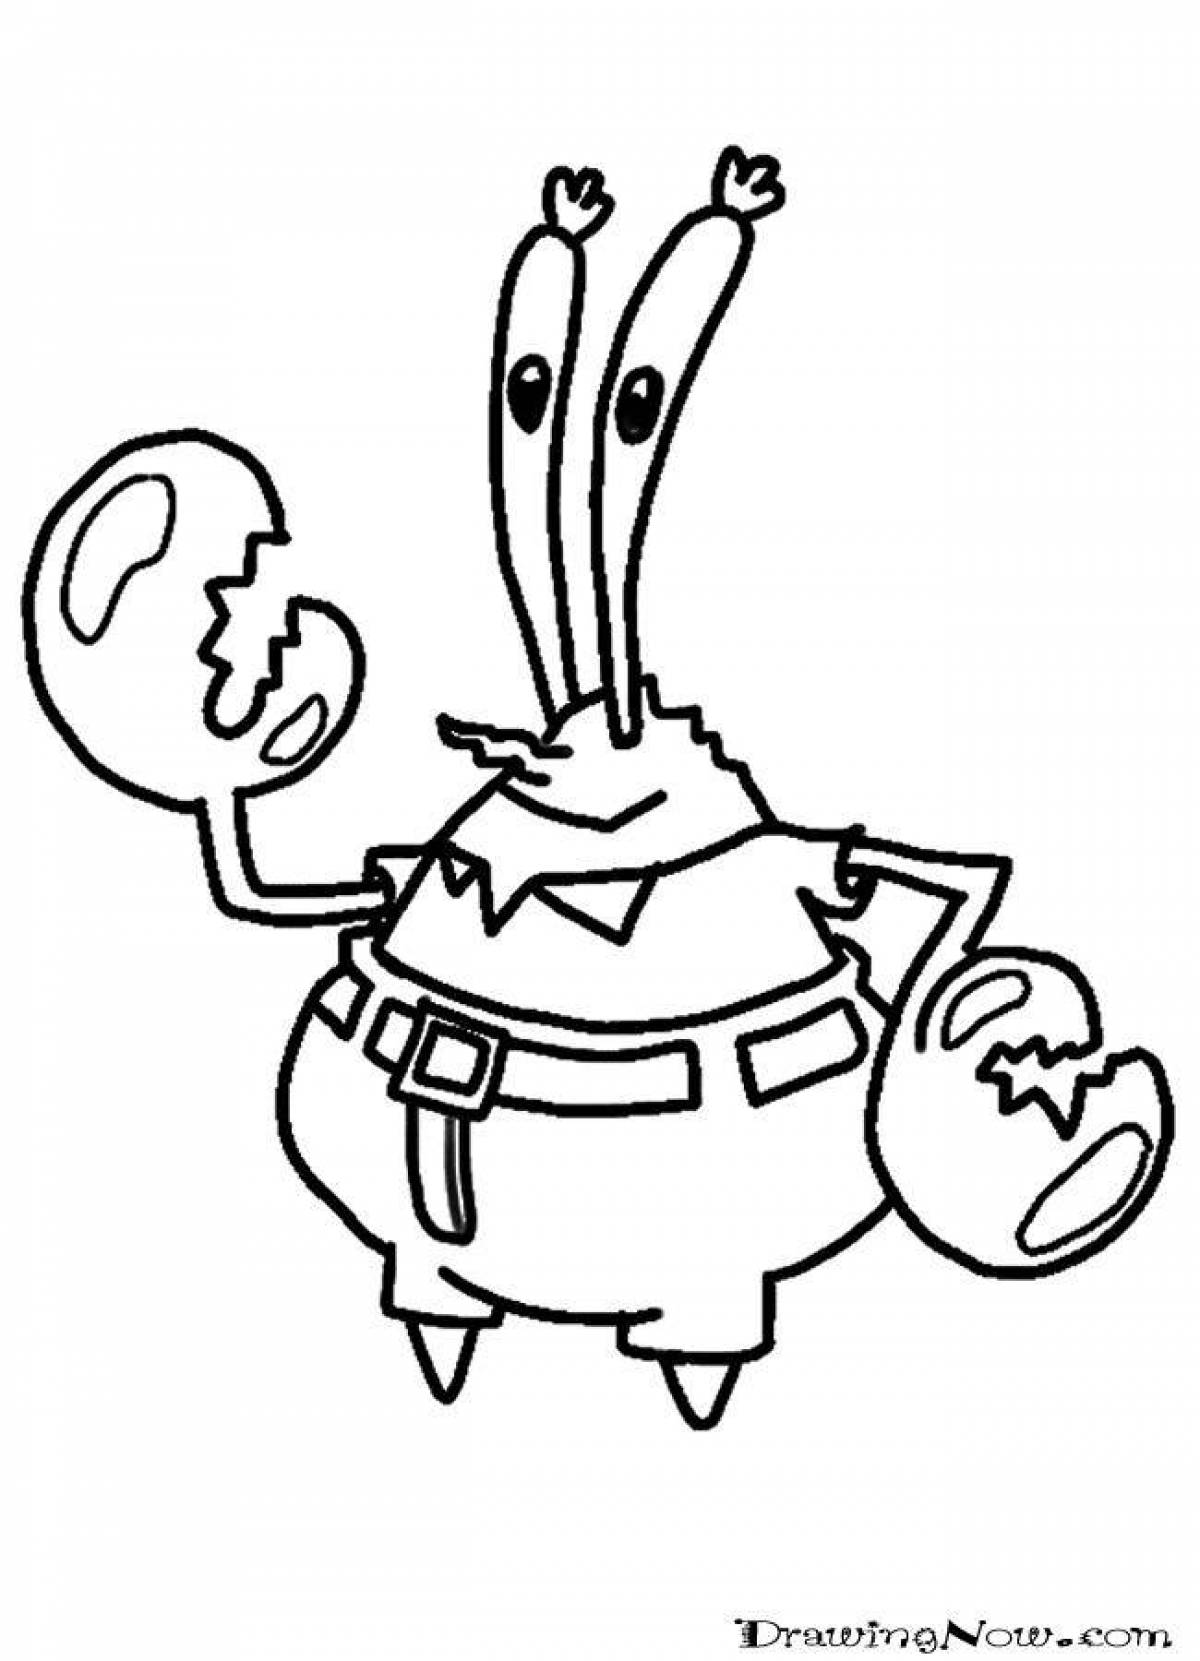 Witty Mr. Krabs coloring page